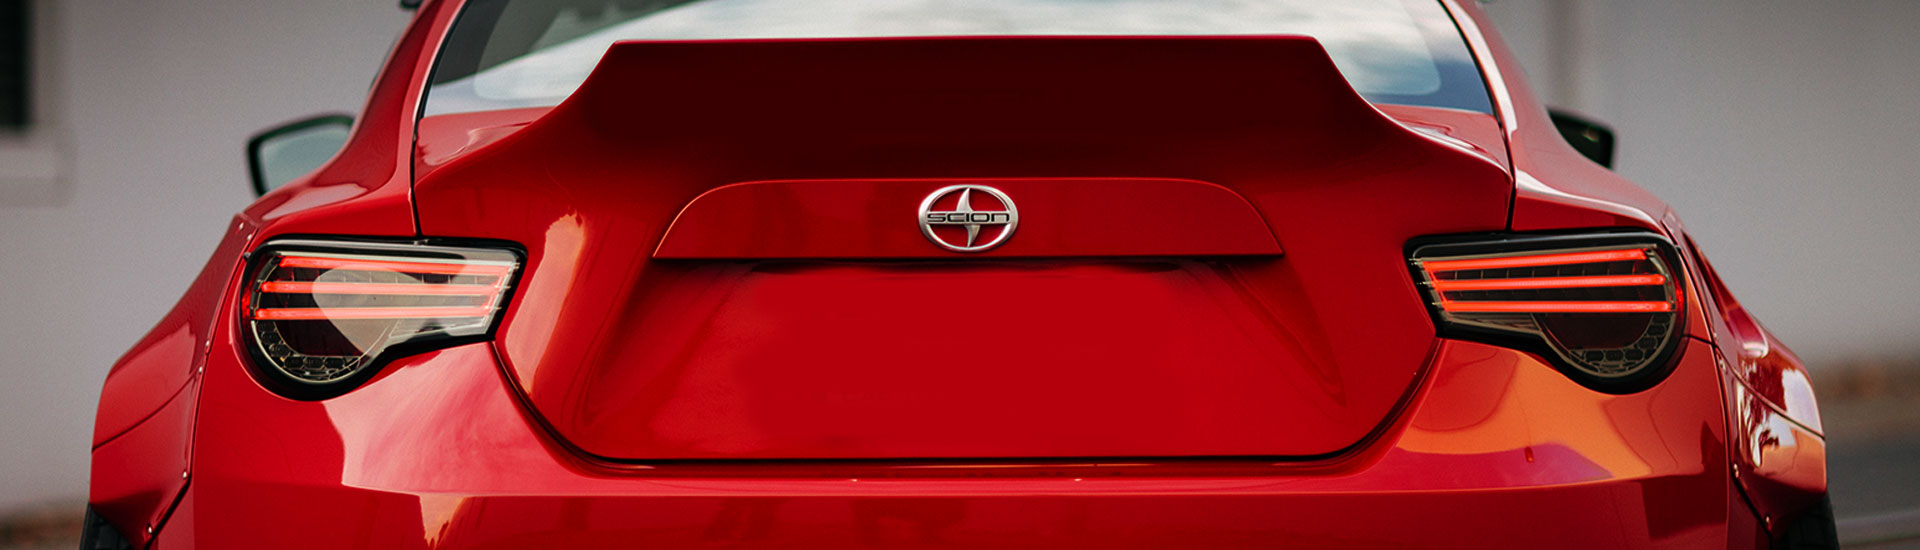 Scion Tail Light Tint Covers